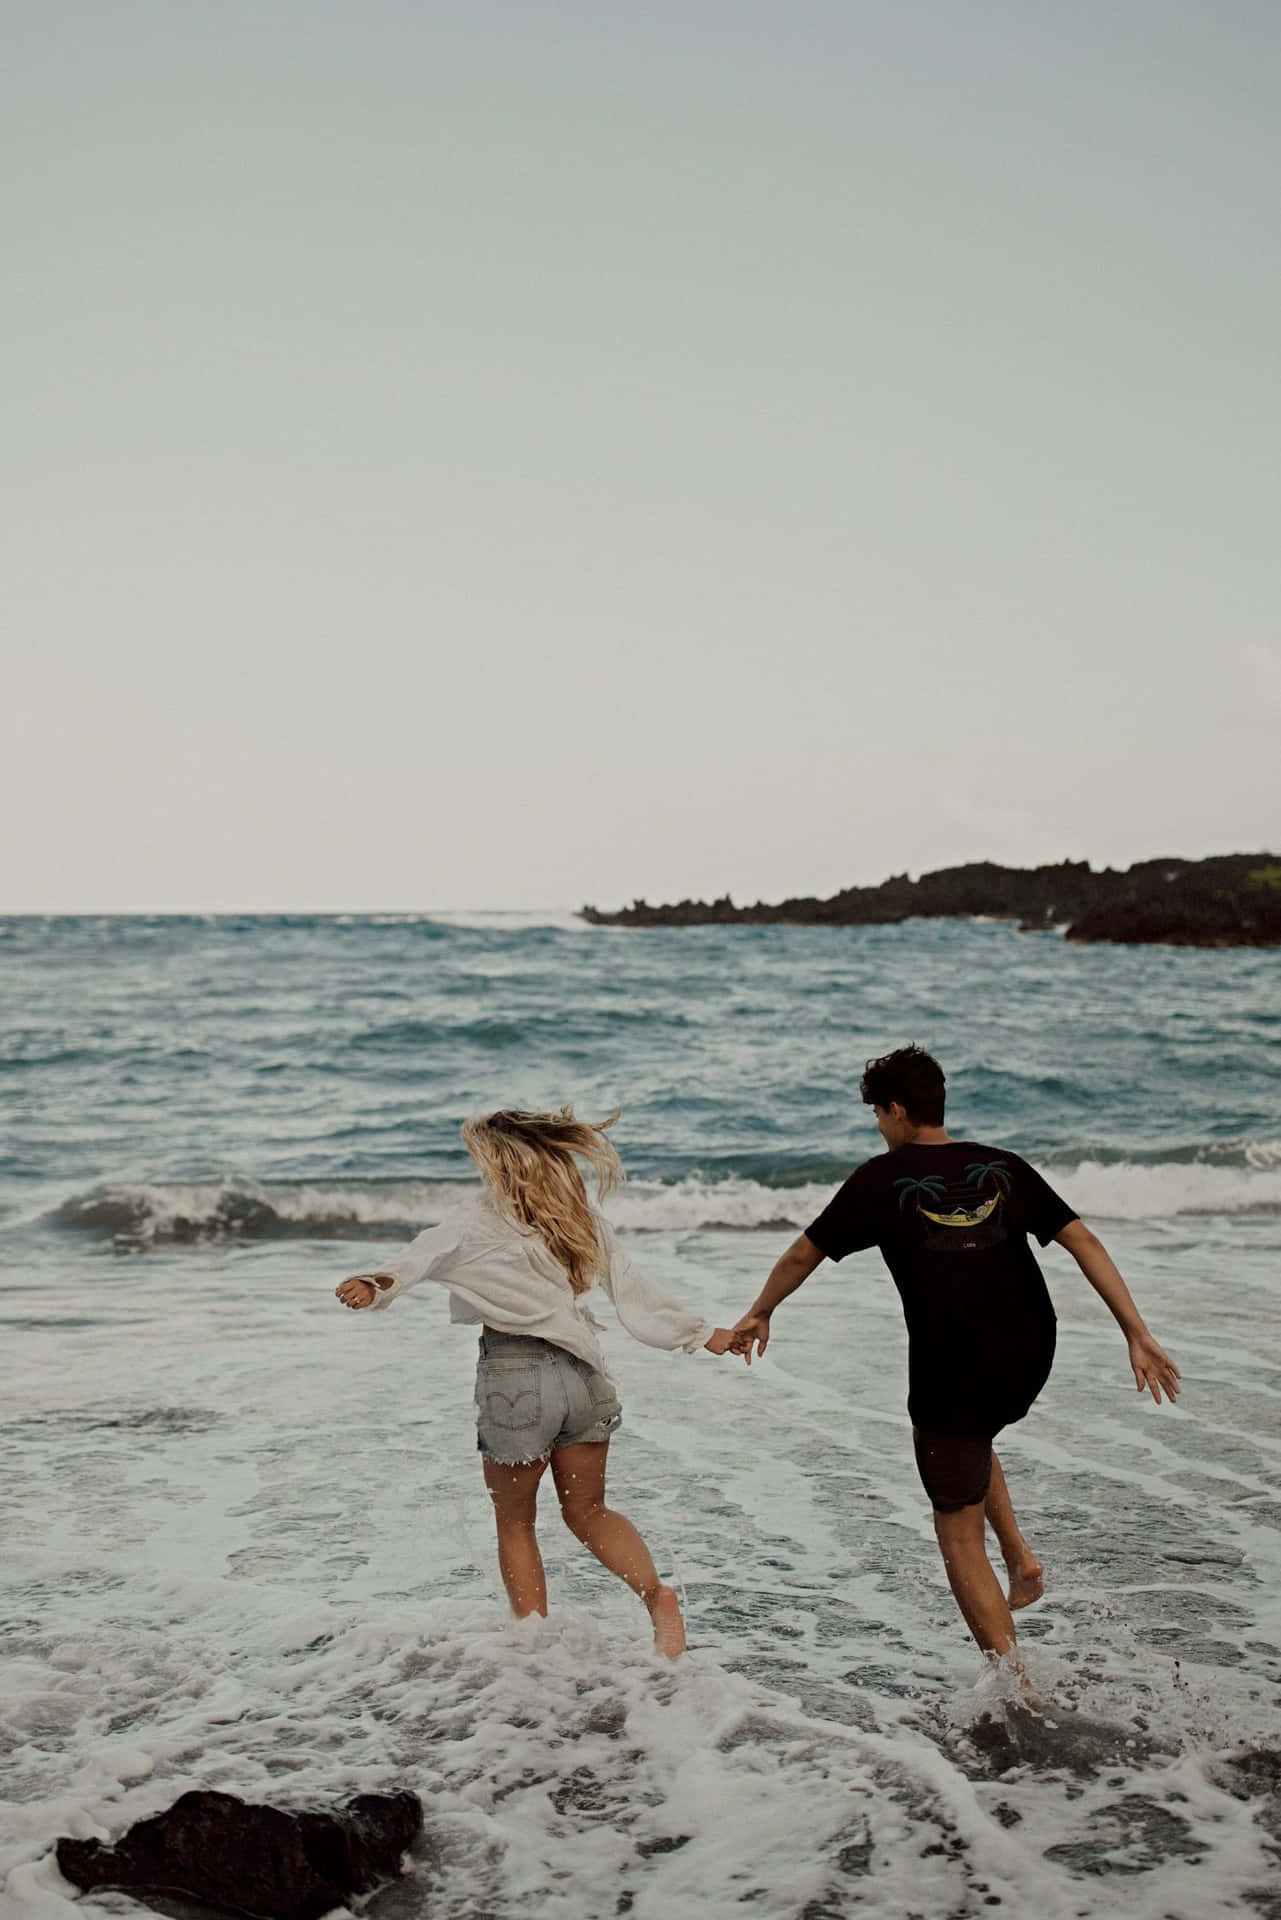 Couple At Beach Running On Water Picture